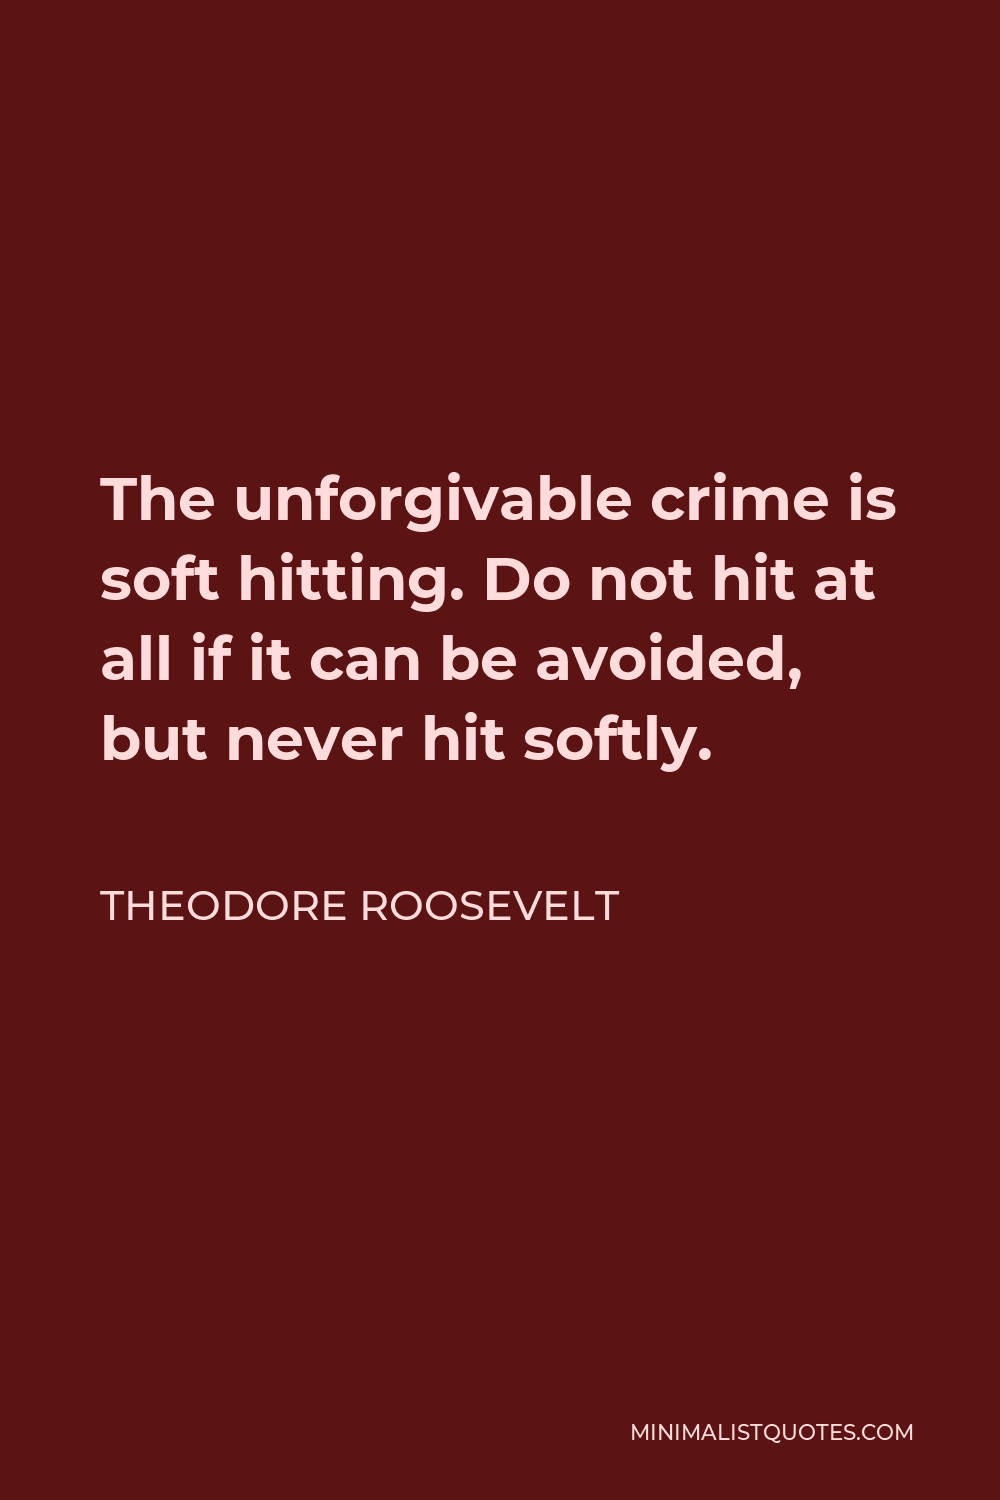 Theodore Roosevelt Quote - The unforgivable crime is soft hitting. Do not hit at all if it can be avoided, but never hit softly.